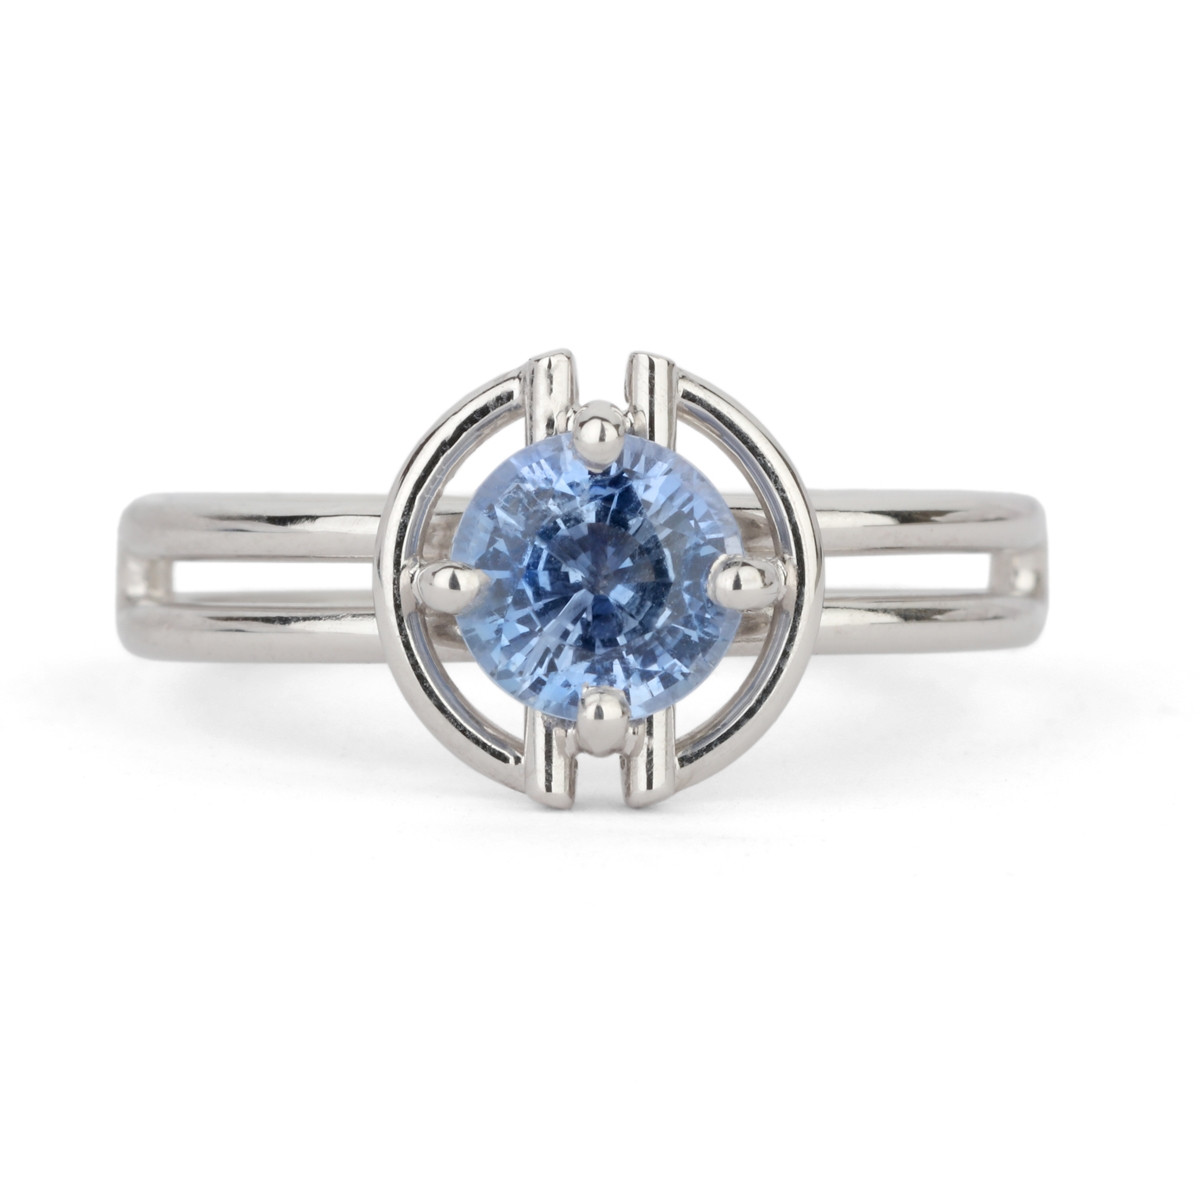 Shimell & Madden, Blue Sapphire & 18ct White Gold Horizon Halo Ring, Tomfoolery